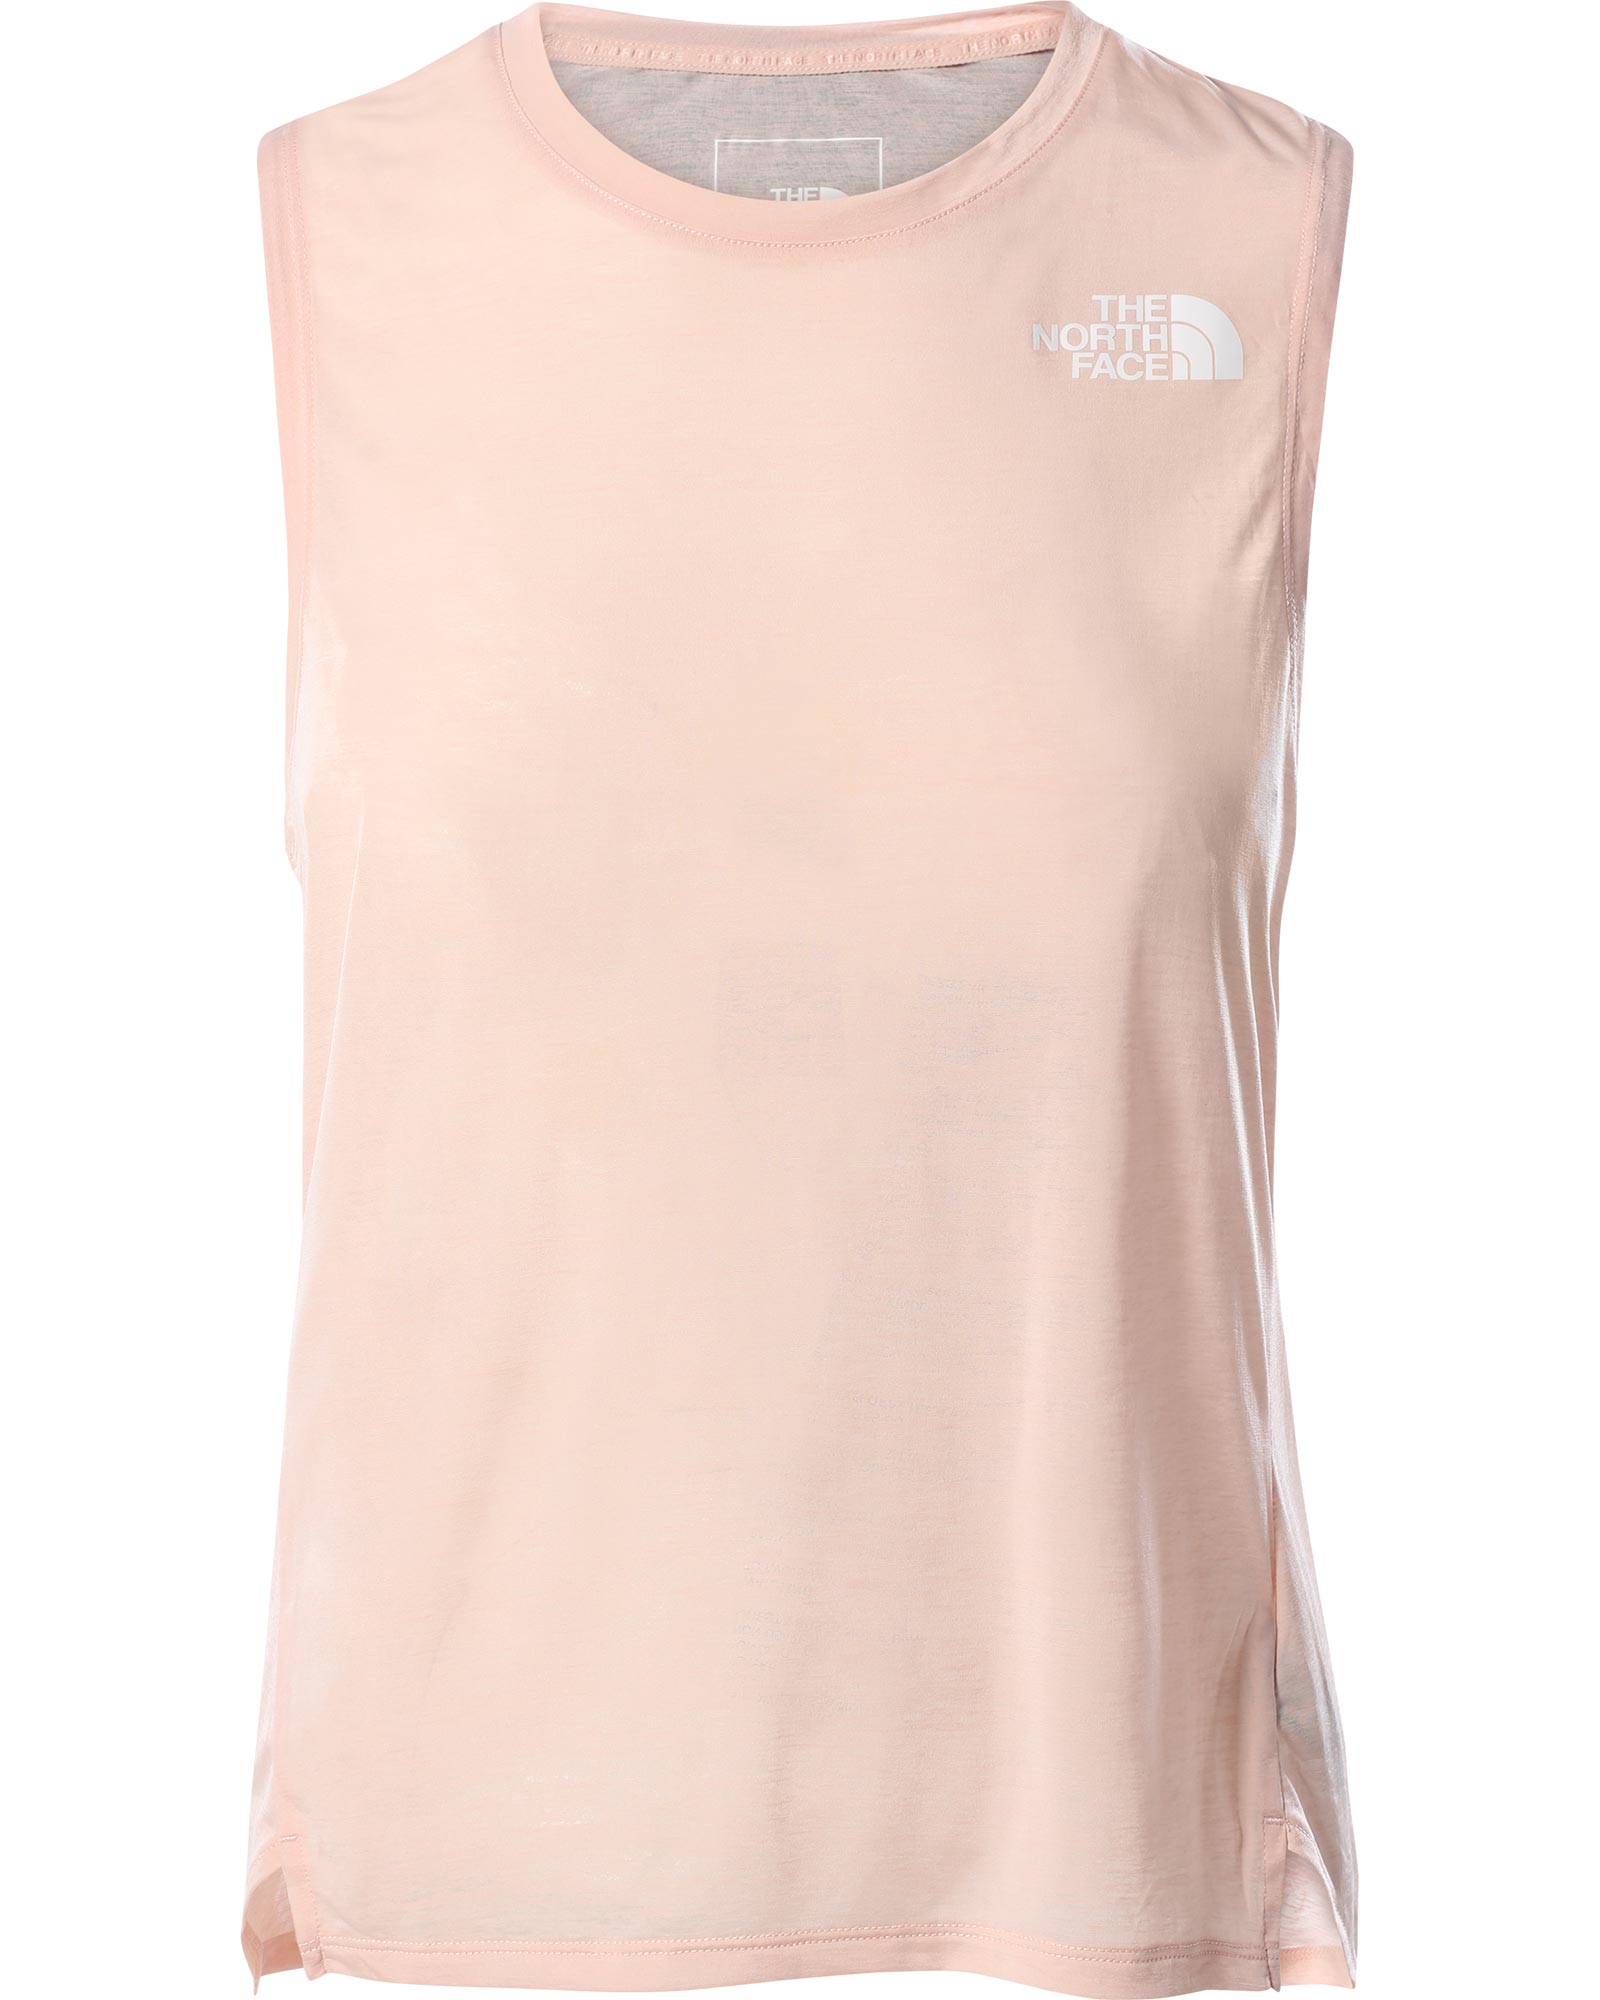 The North Face Up with the Sun Women’s Tank - Evening Sand Pink XS